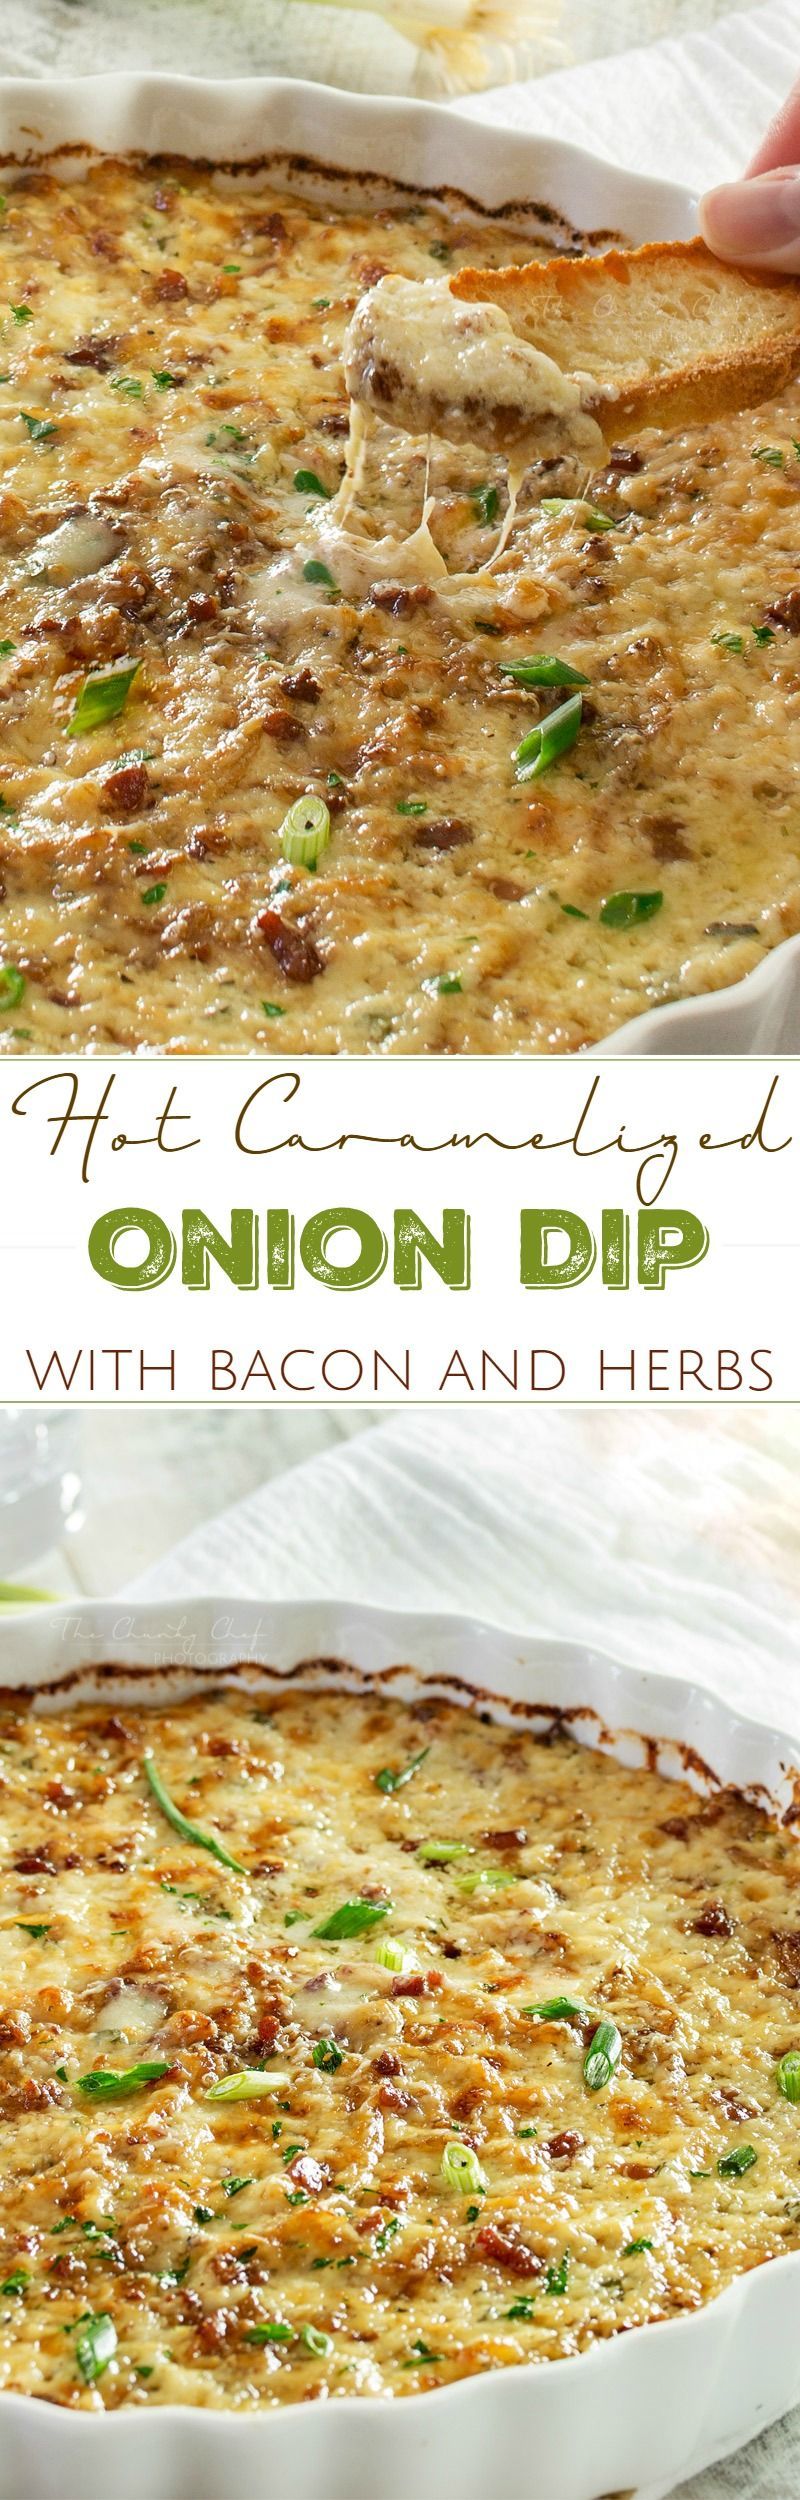 Caramelized Onion Dip | The ultimate party dip! This onion dip is made with gruyere, white cheddar, he